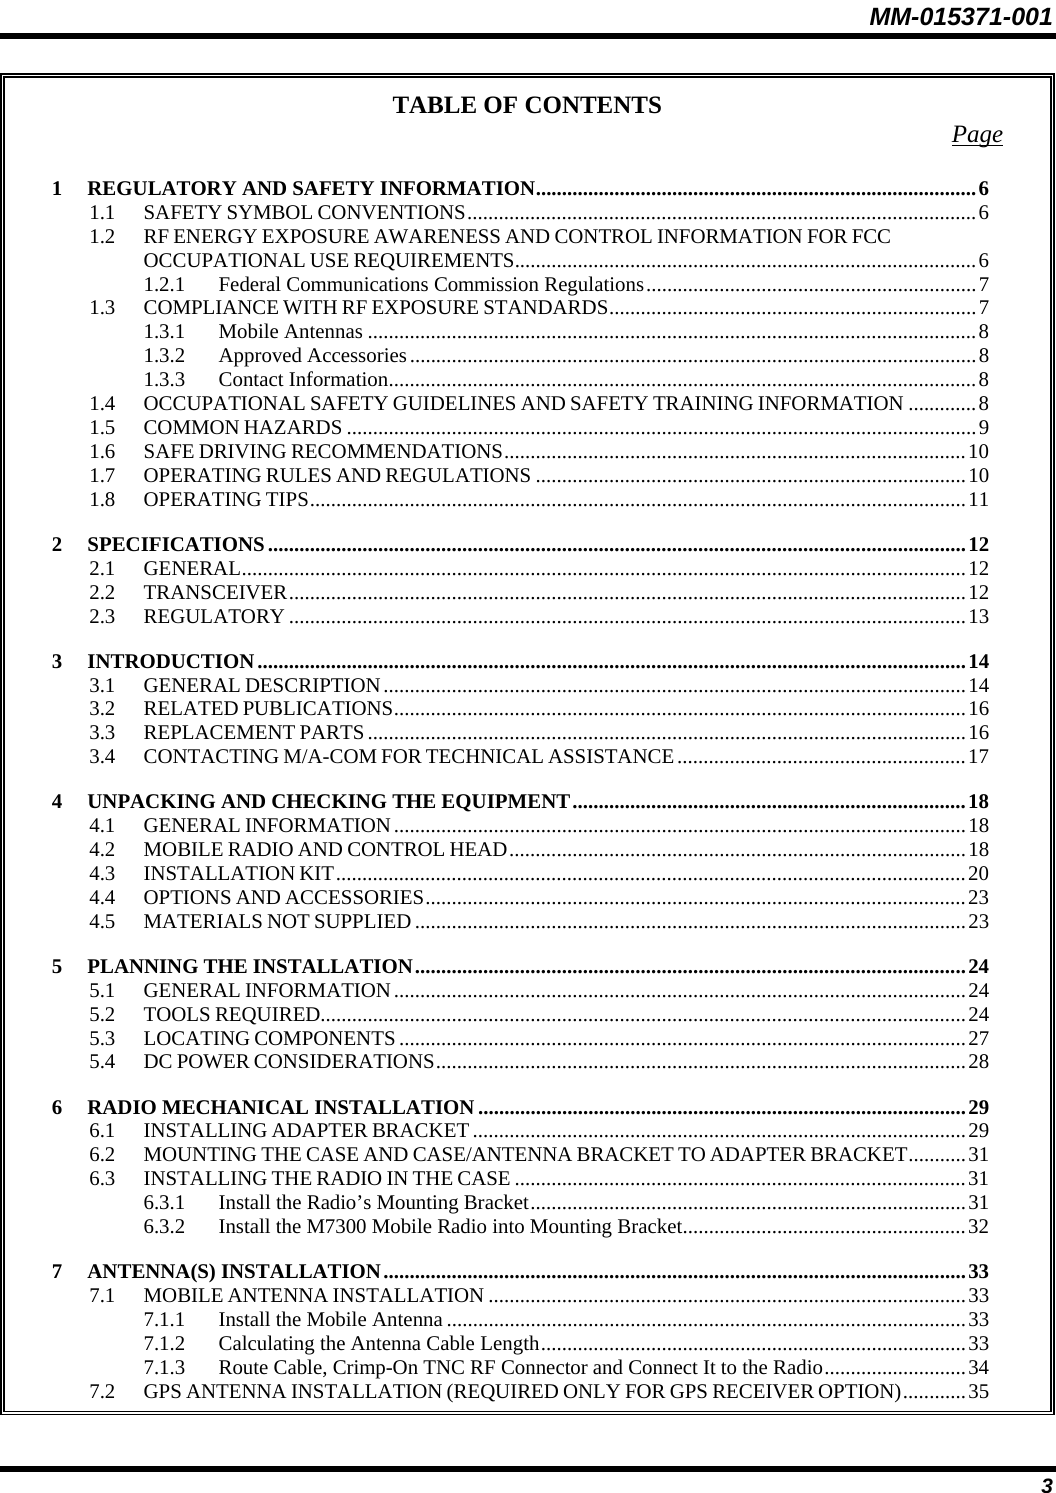 MM-015371-001 TABLE OF CONTENTS  Page 1 REGULATORY AND SAFETY INFORMATION....................................................................................6 1.1 SAFETY SYMBOL CONVENTIONS.................................................................................................6 1.2 RF ENERGY EXPOSURE AWARENESS AND CONTROL INFORMATION FOR FCC OCCUPATIONAL USE REQUIREMENTS........................................................................................6 1.2.1 Federal Communications Commission Regulations...............................................................7 1.3 COMPLIANCE WITH RF EXPOSURE STANDARDS......................................................................7 1.3.1 Mobile Antennas ....................................................................................................................8 1.3.2 Approved Accessories............................................................................................................8 1.3.3 Contact Information................................................................................................................8 1.4 OCCUPATIONAL SAFETY GUIDELINES AND SAFETY TRAINING INFORMATION .............8 1.5 COMMON HAZARDS ........................................................................................................................9 1.6 SAFE DRIVING RECOMMENDATIONS........................................................................................10 1.7 OPERATING RULES AND REGULATIONS ..................................................................................10 1.8 OPERATING TIPS.............................................................................................................................11 2 SPECIFICATIONS.....................................................................................................................................12 2.1 GENERAL..........................................................................................................................................12 2.2 TRANSCEIVER.................................................................................................................................12 2.3 REGULATORY .................................................................................................................................13 3 INTRODUCTION.......................................................................................................................................14 3.1 GENERAL DESCRIPTION...............................................................................................................14 3.2 RELATED PUBLICATIONS.............................................................................................................16 3.3 REPLACEMENT PARTS..................................................................................................................16 3.4 CONTACTING M/A-COM FOR TECHNICAL ASSISTANCE.......................................................17 4 UNPACKING AND CHECKING THE EQUIPMENT...........................................................................18 4.1 GENERAL INFORMATION.............................................................................................................18 4.2 MOBILE RADIO AND CONTROL HEAD.......................................................................................18 4.3 INSTALLATION KIT........................................................................................................................20 4.4 OPTIONS AND ACCESSORIES.......................................................................................................23 4.5 MATERIALS NOT SUPPLIED .........................................................................................................23 5 PLANNING THE INSTALLATION.........................................................................................................24 5.1 GENERAL INFORMATION.............................................................................................................24 5.2 TOOLS REQUIRED...........................................................................................................................24 5.3 LOCATING COMPONENTS ............................................................................................................27 5.4 DC POWER CONSIDERATIONS.....................................................................................................28 6 RADIO MECHANICAL INSTALLATION .............................................................................................29 6.1 INSTALLING ADAPTER BRACKET..............................................................................................29 6.2 MOUNTING THE CASE AND CASE/ANTENNA BRACKET TO ADAPTER BRACKET...........31 6.3 INSTALLING THE RADIO IN THE CASE ......................................................................................31 6.3.1 Install the Radio’s Mounting Bracket...................................................................................31 6.3.2 Install the M7300 Mobile Radio into Mounting Bracket......................................................32 7 ANTENNA(S) INSTALLATION...............................................................................................................33 7.1 MOBILE ANTENNA INSTALLATION ...........................................................................................33 7.1.1 Install the Mobile Antenna ...................................................................................................33 7.1.2 Calculating the Antenna Cable Length.................................................................................33 7.1.3 Route Cable, Crimp-On TNC RF Connector and Connect It to the Radio...........................34 7.2 GPS ANTENNA INSTALLATION (REQUIRED ONLY FOR GPS RECEIVER OPTION)............35 3 